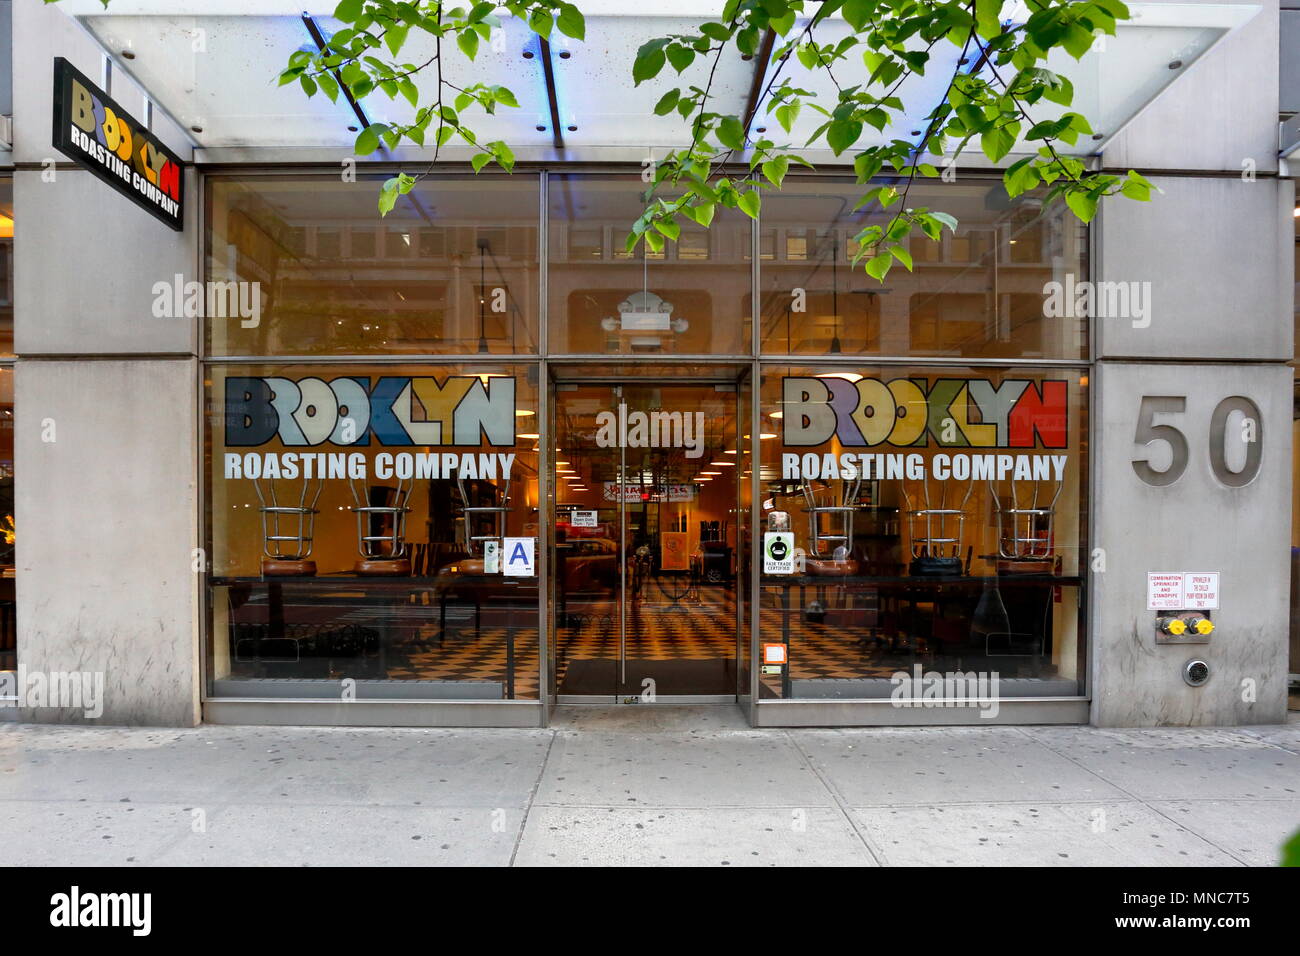 Brooklyn Roasting Company, 50 W 23rd St, New York, NY. exterior storefront of a coffee shop in the Chelsea neighborhood of Manhattan. Stock Photo